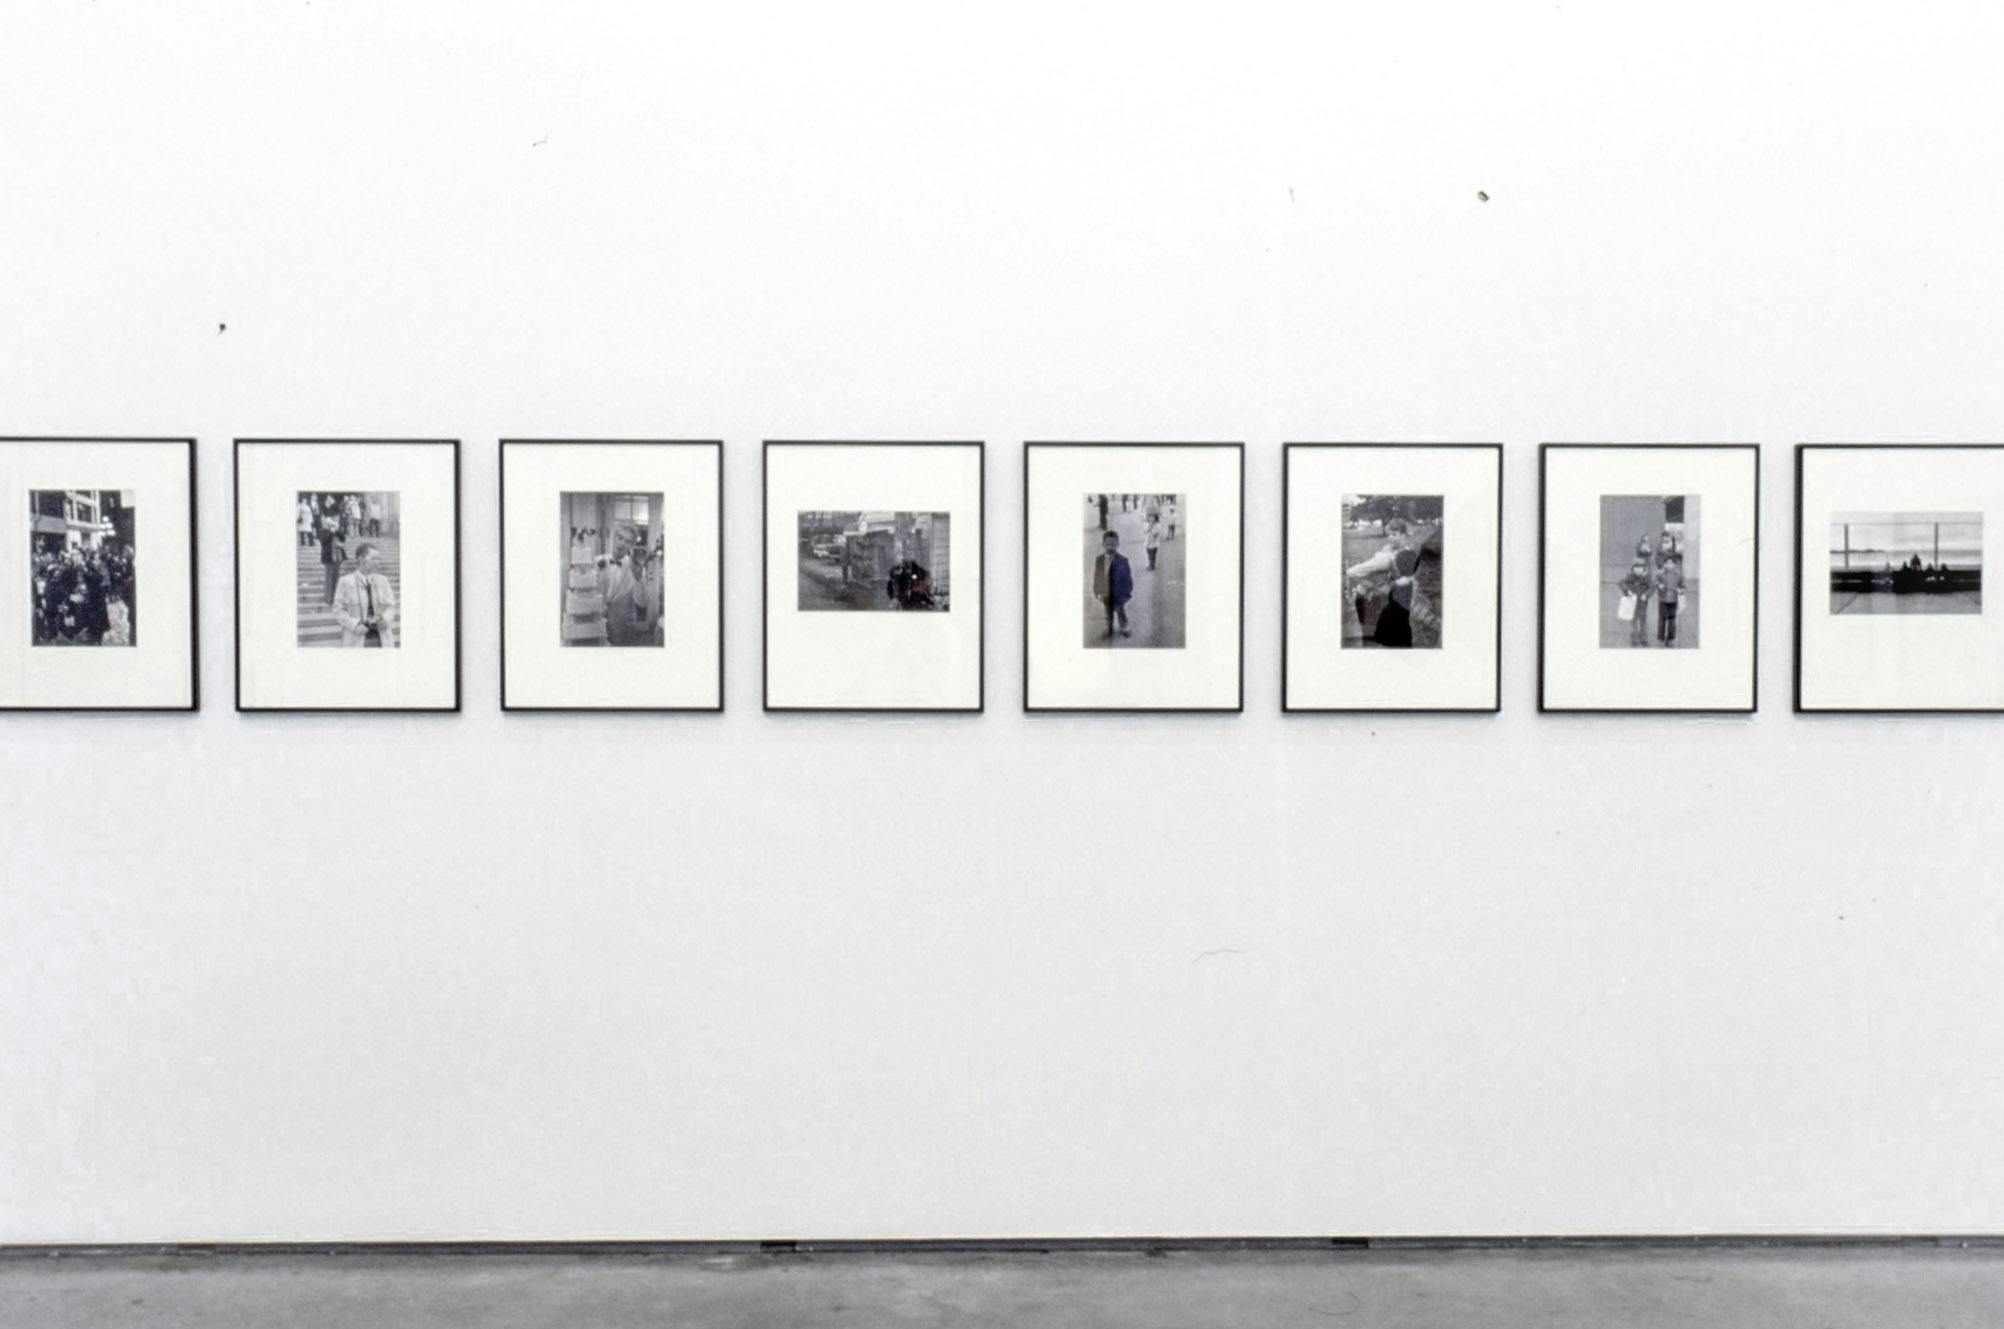 Eight black and white photographs are mounted on the wall. They are placed in a row horizontal to the floor. Many of those photographs depict pedestrians on the streets. 